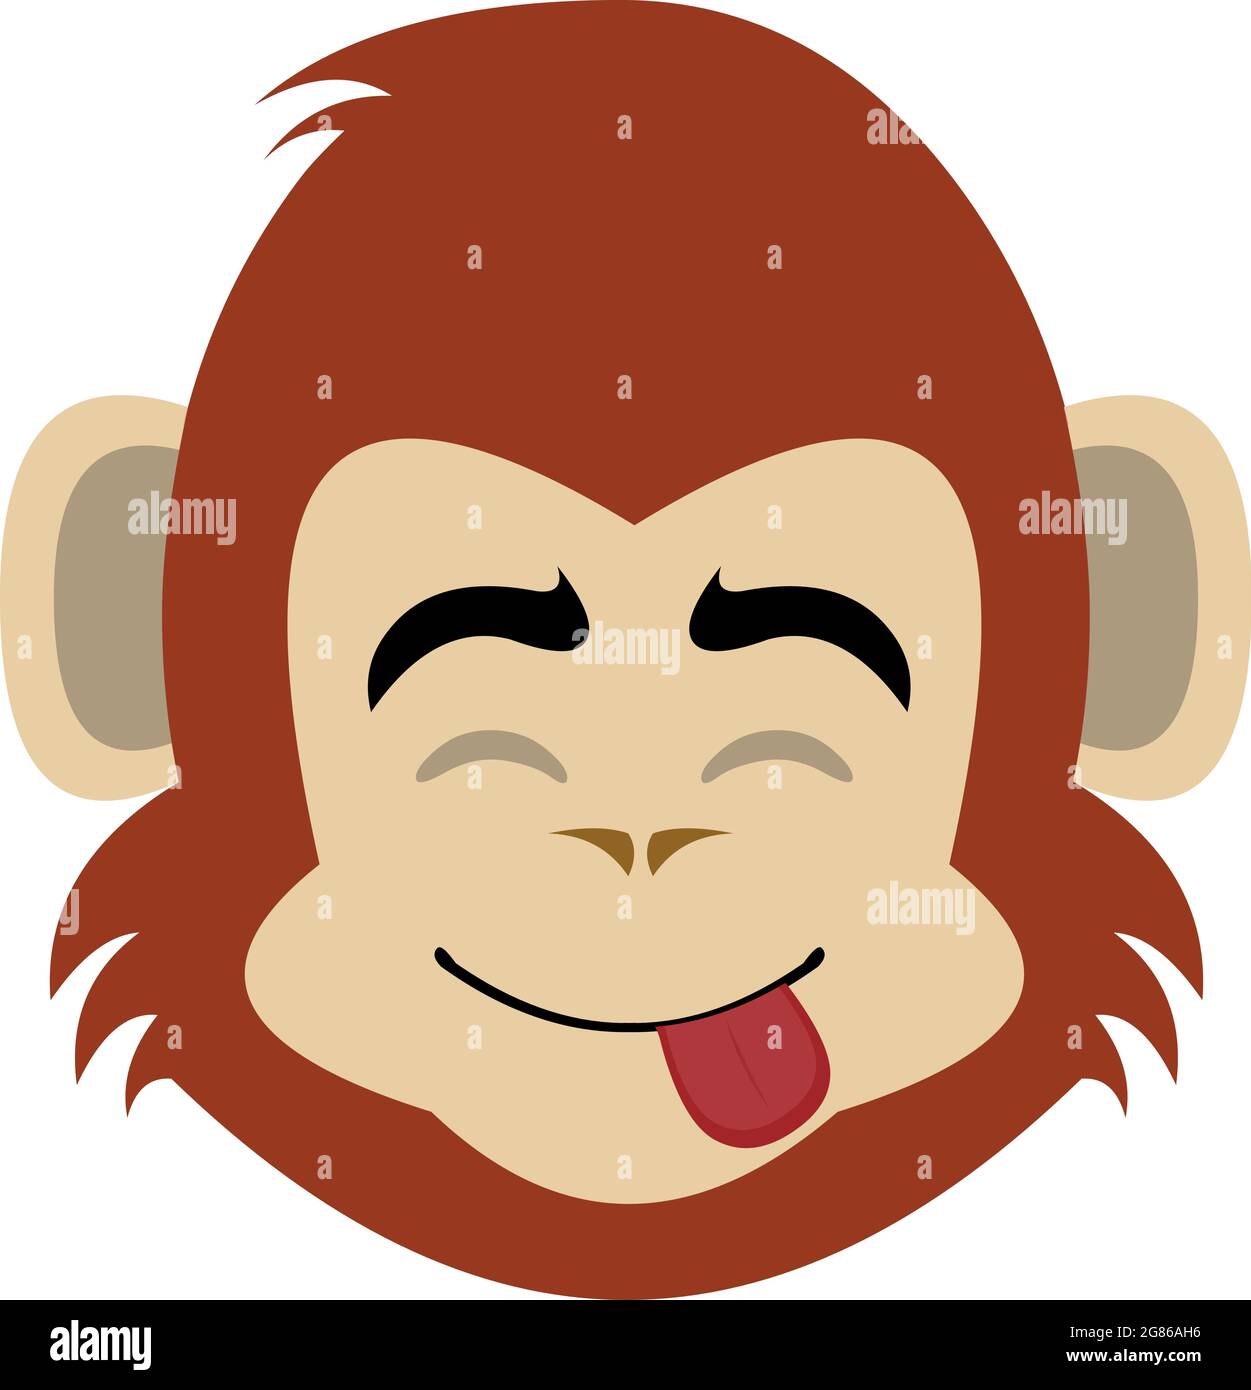 Vector emoticon illustration of the head of a monkey or chimpanzee cartoon with a delicious expression on his face Stock Vector